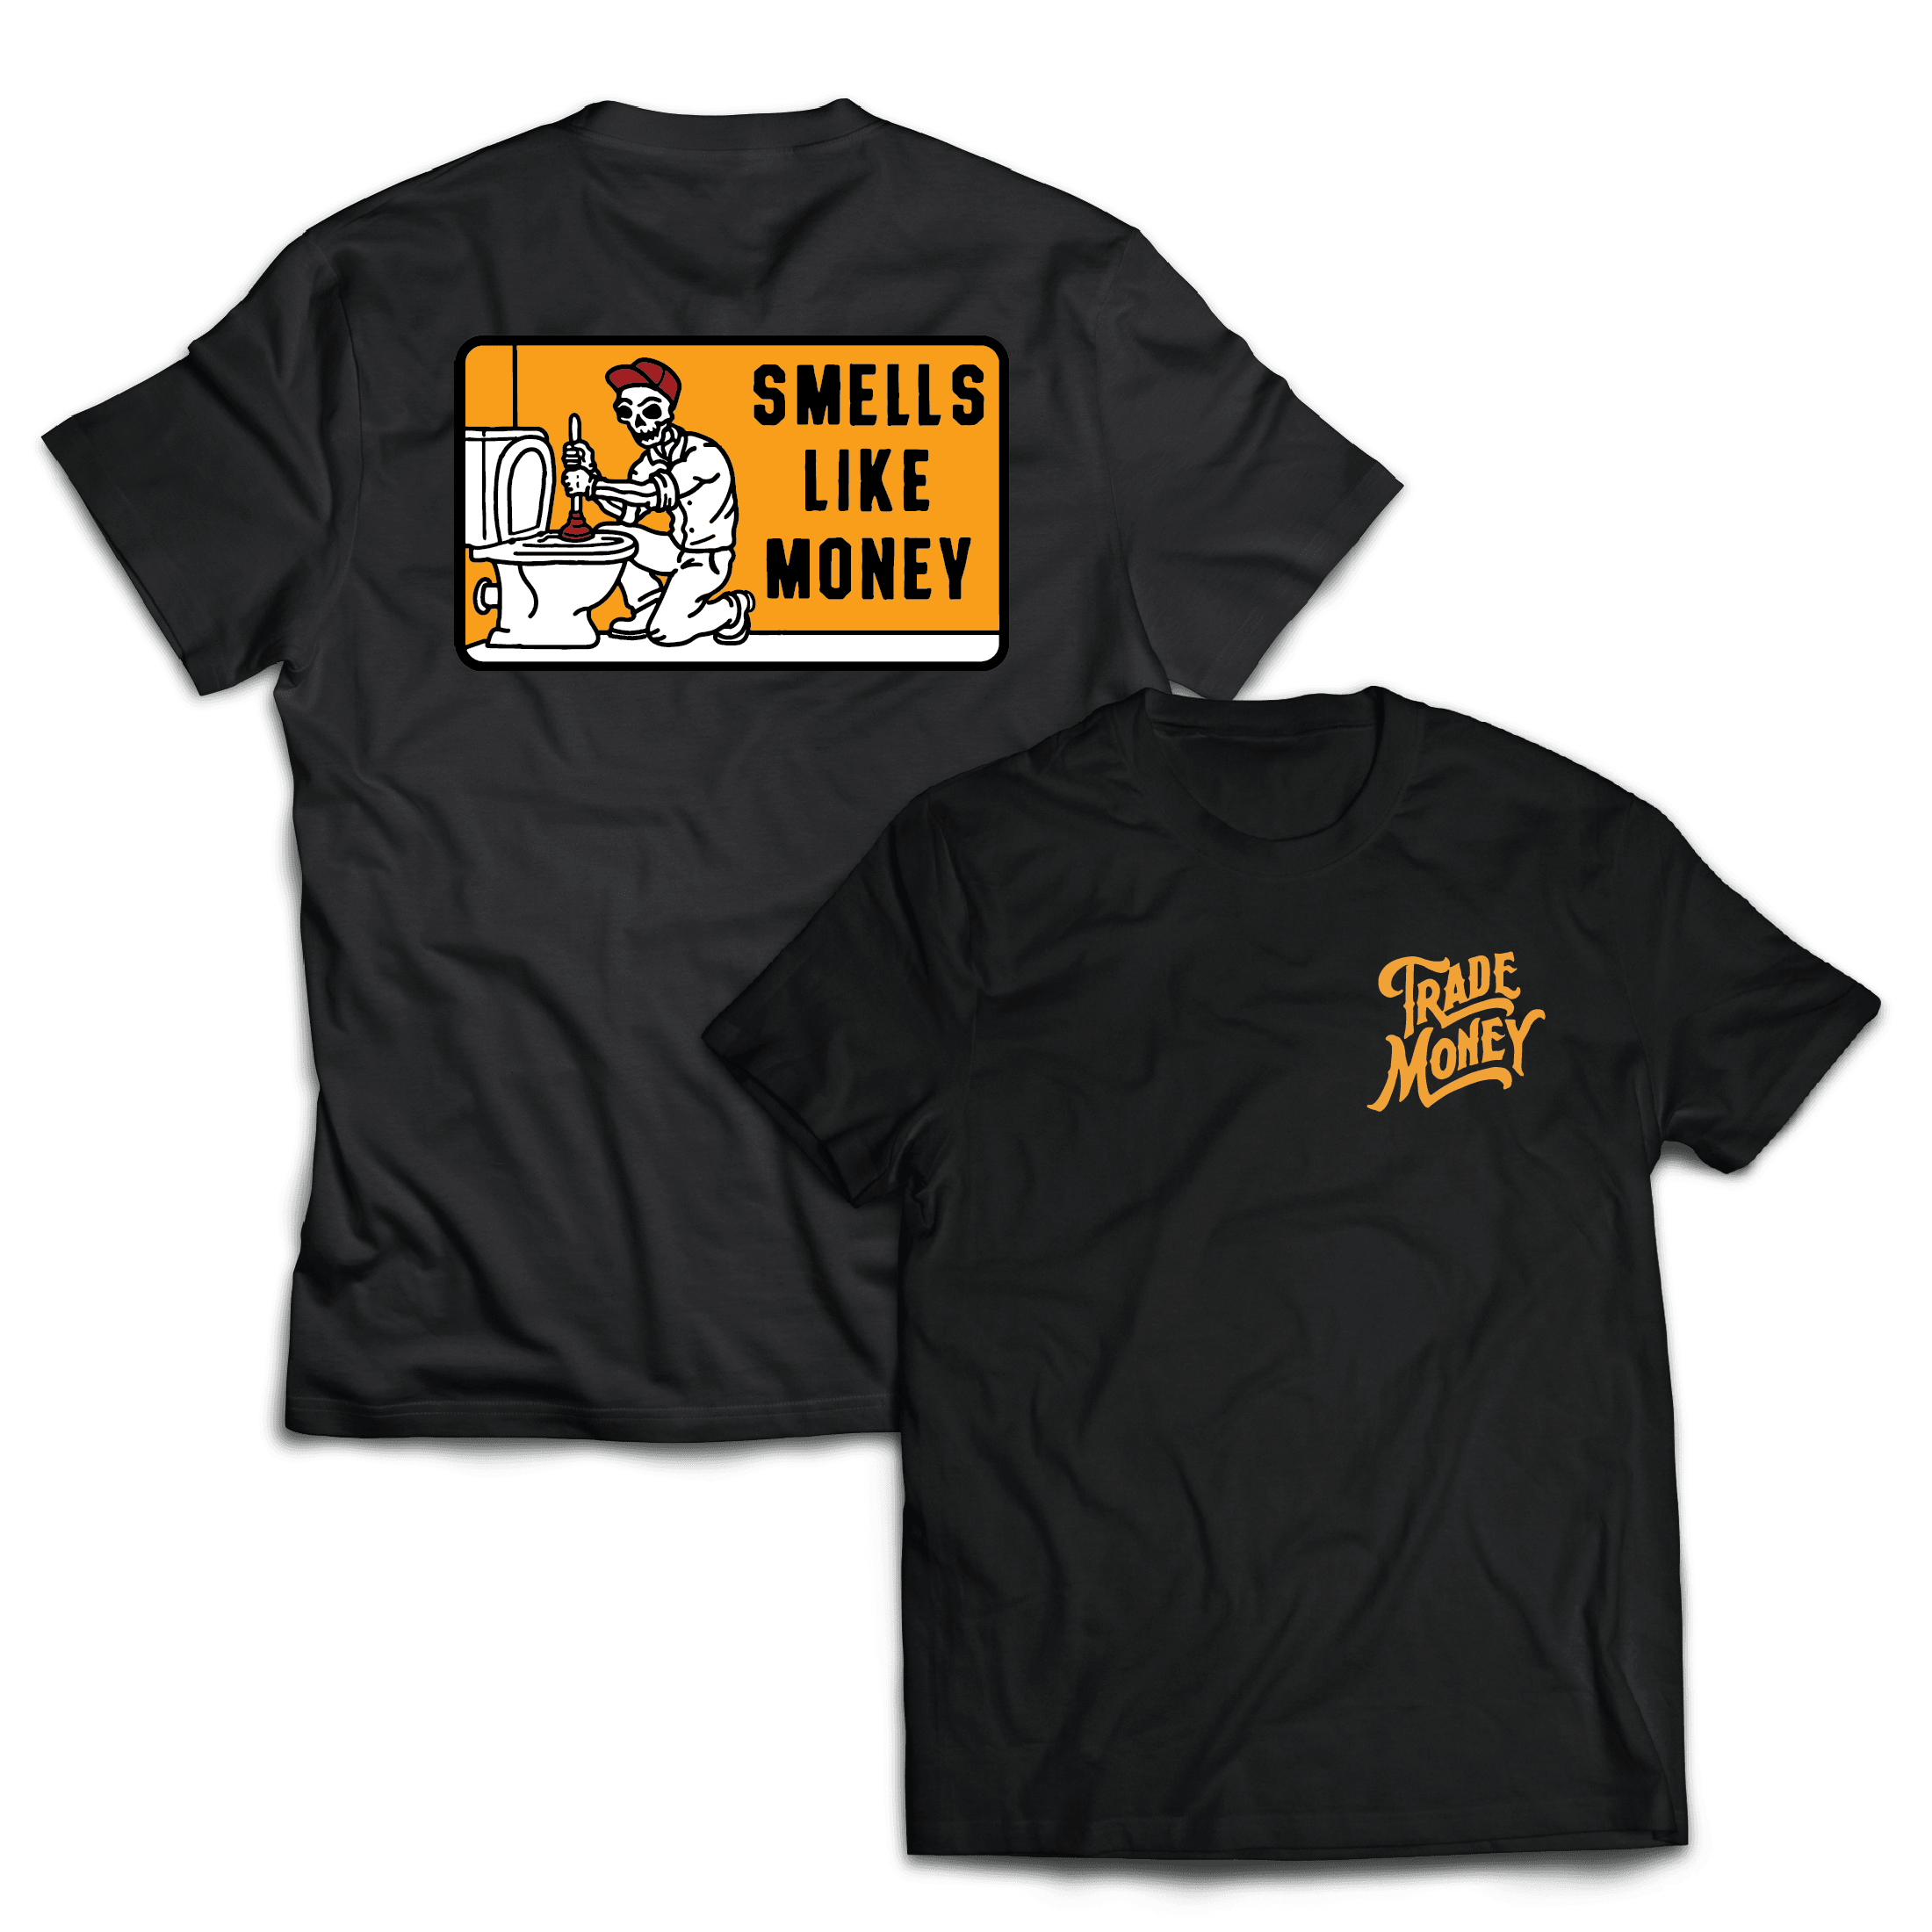 Smells Like Money Tee, Black Frost - Purpose-Built / Home of the Trades